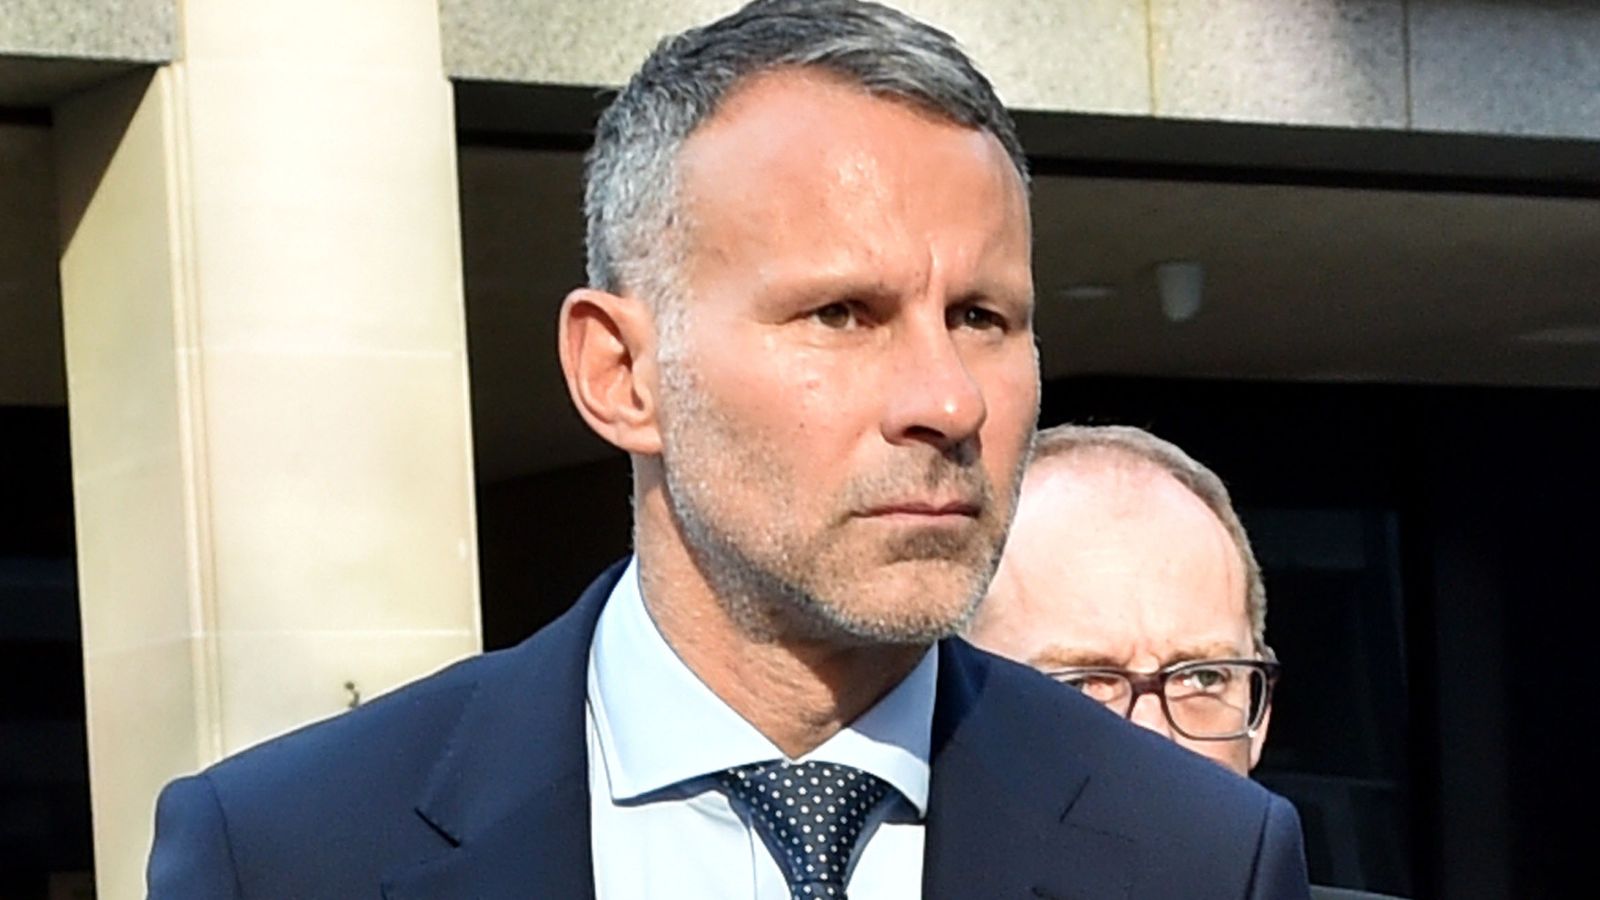 Ryan Giggs trial: Former footballer's ex-girlfriend says staged photo was to 'take back control'